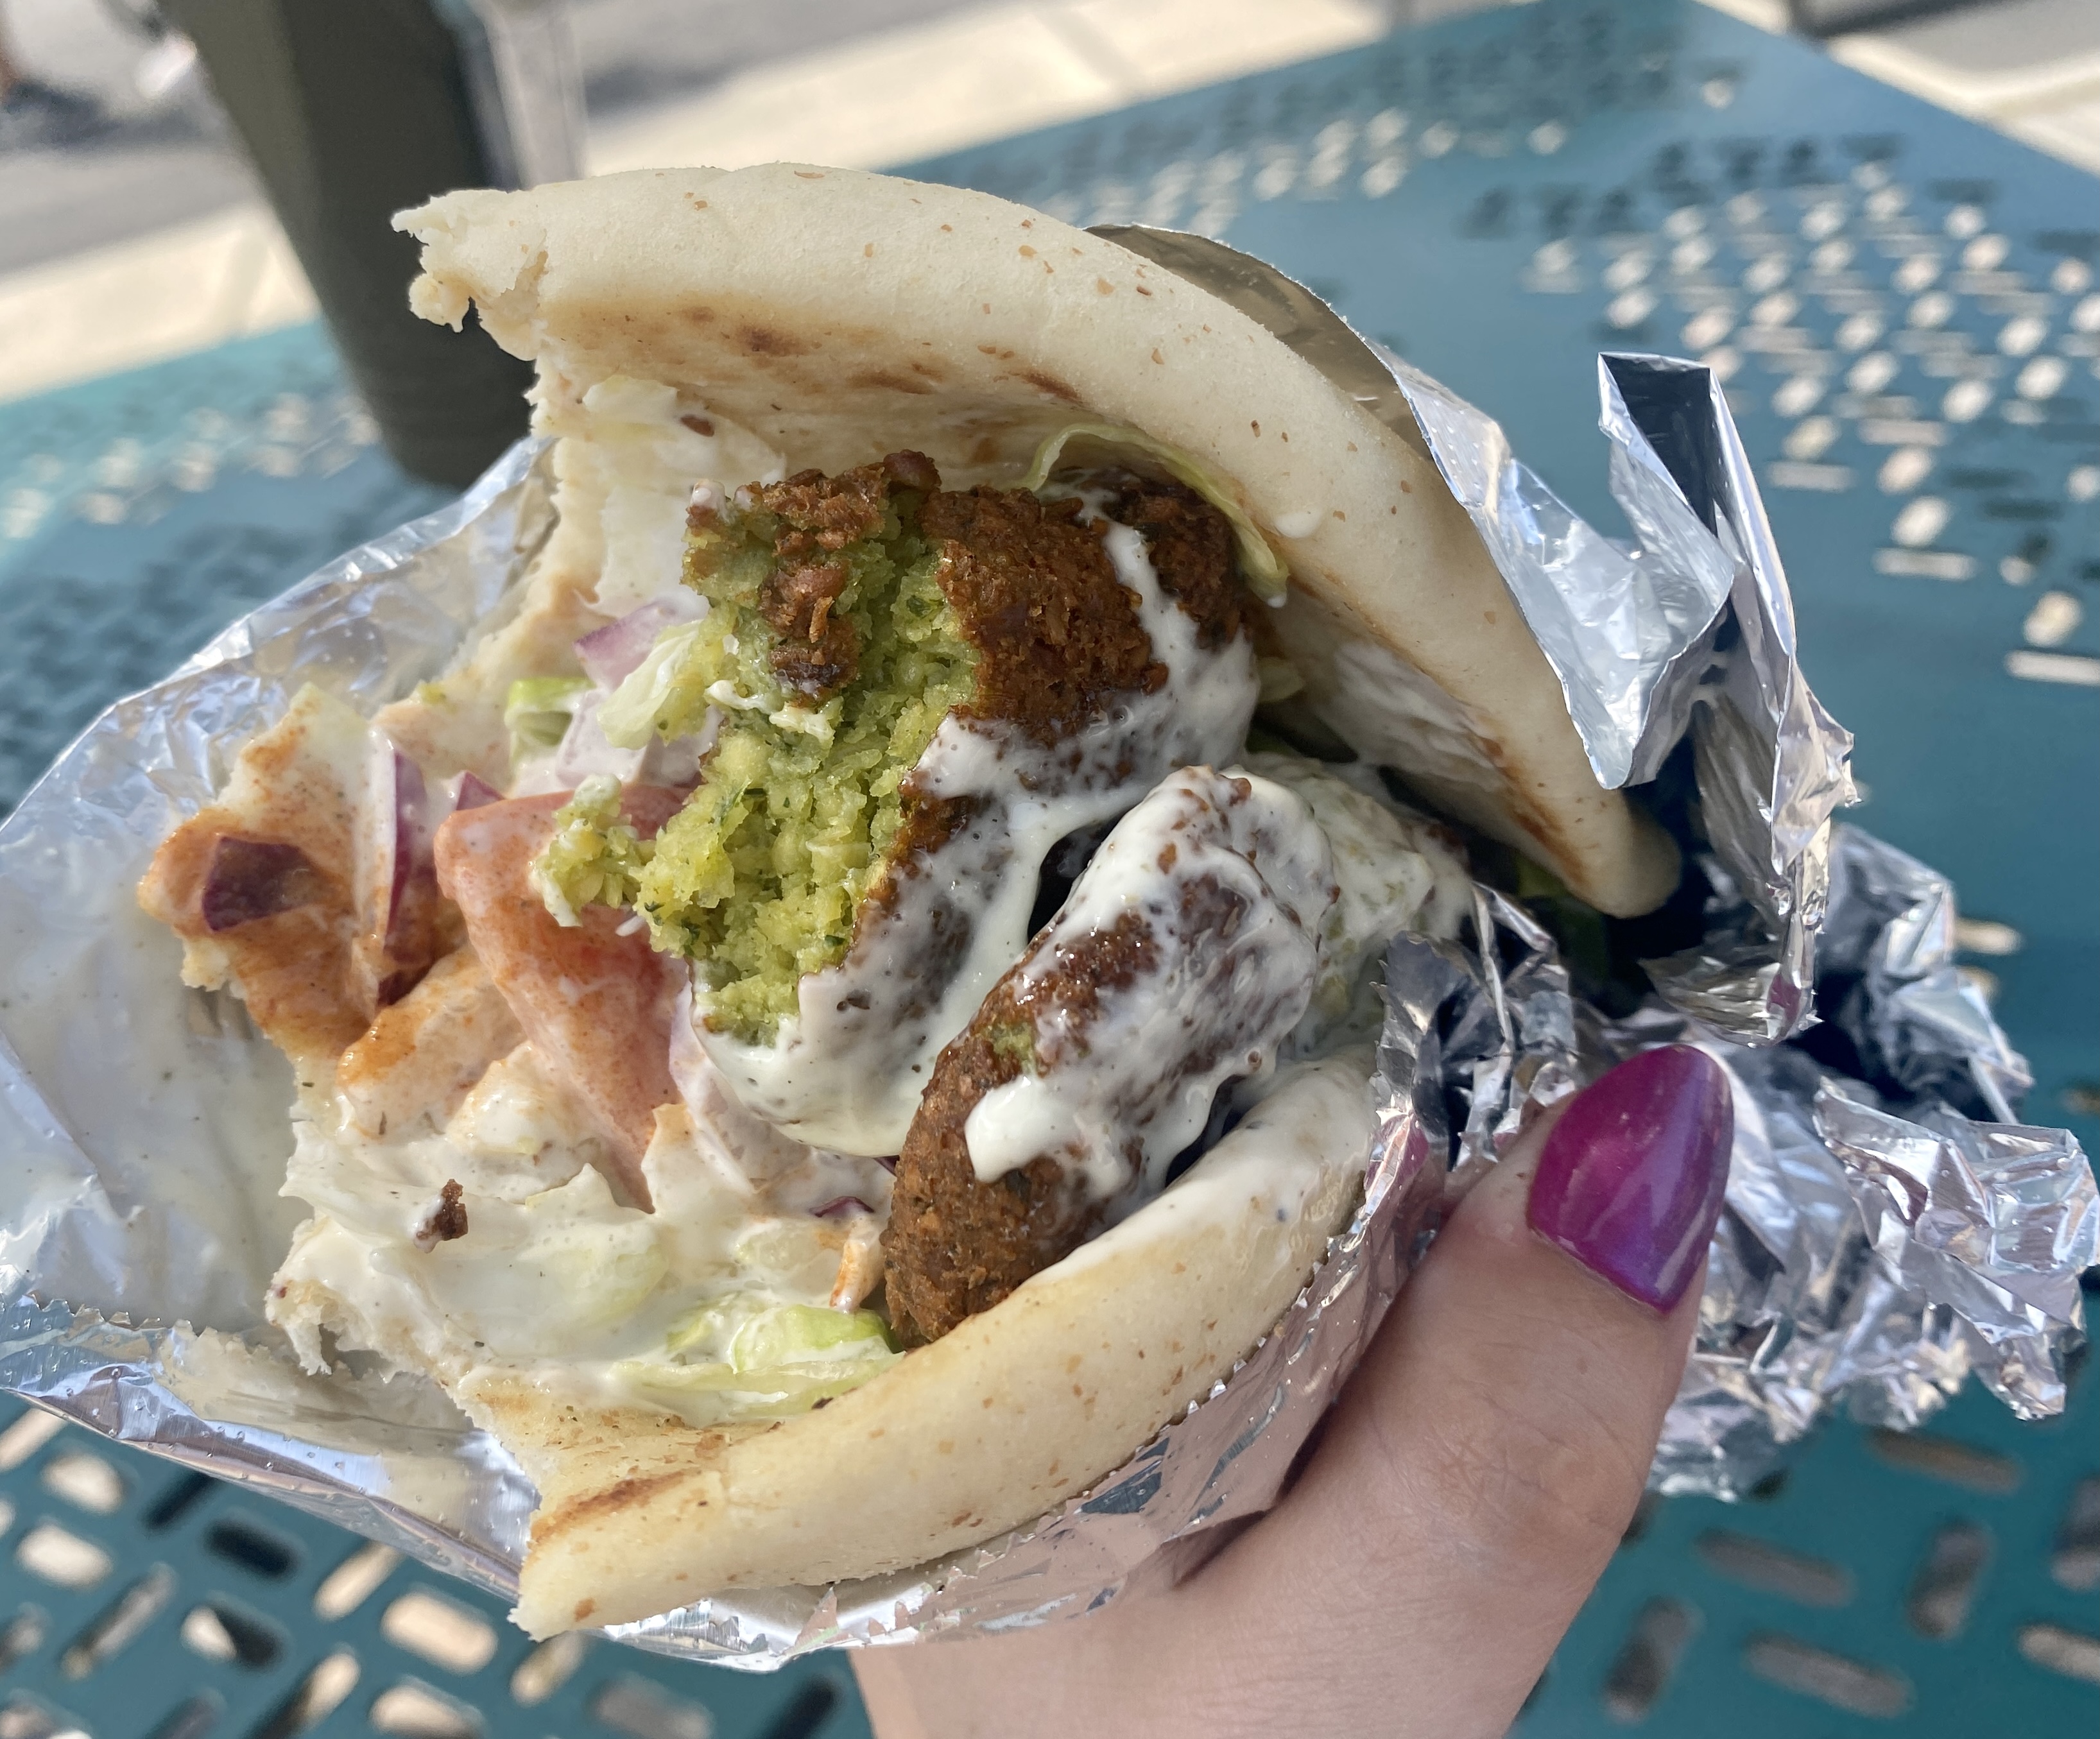 The Falafel Gyro from Syracuse Halal Gyro on Restaurant Row, pictured on Wednesday, Aug. 23, 2023, is one of the tastiest sandwiches at the New York State Fair. Samantha House | shouse@syracuse.com